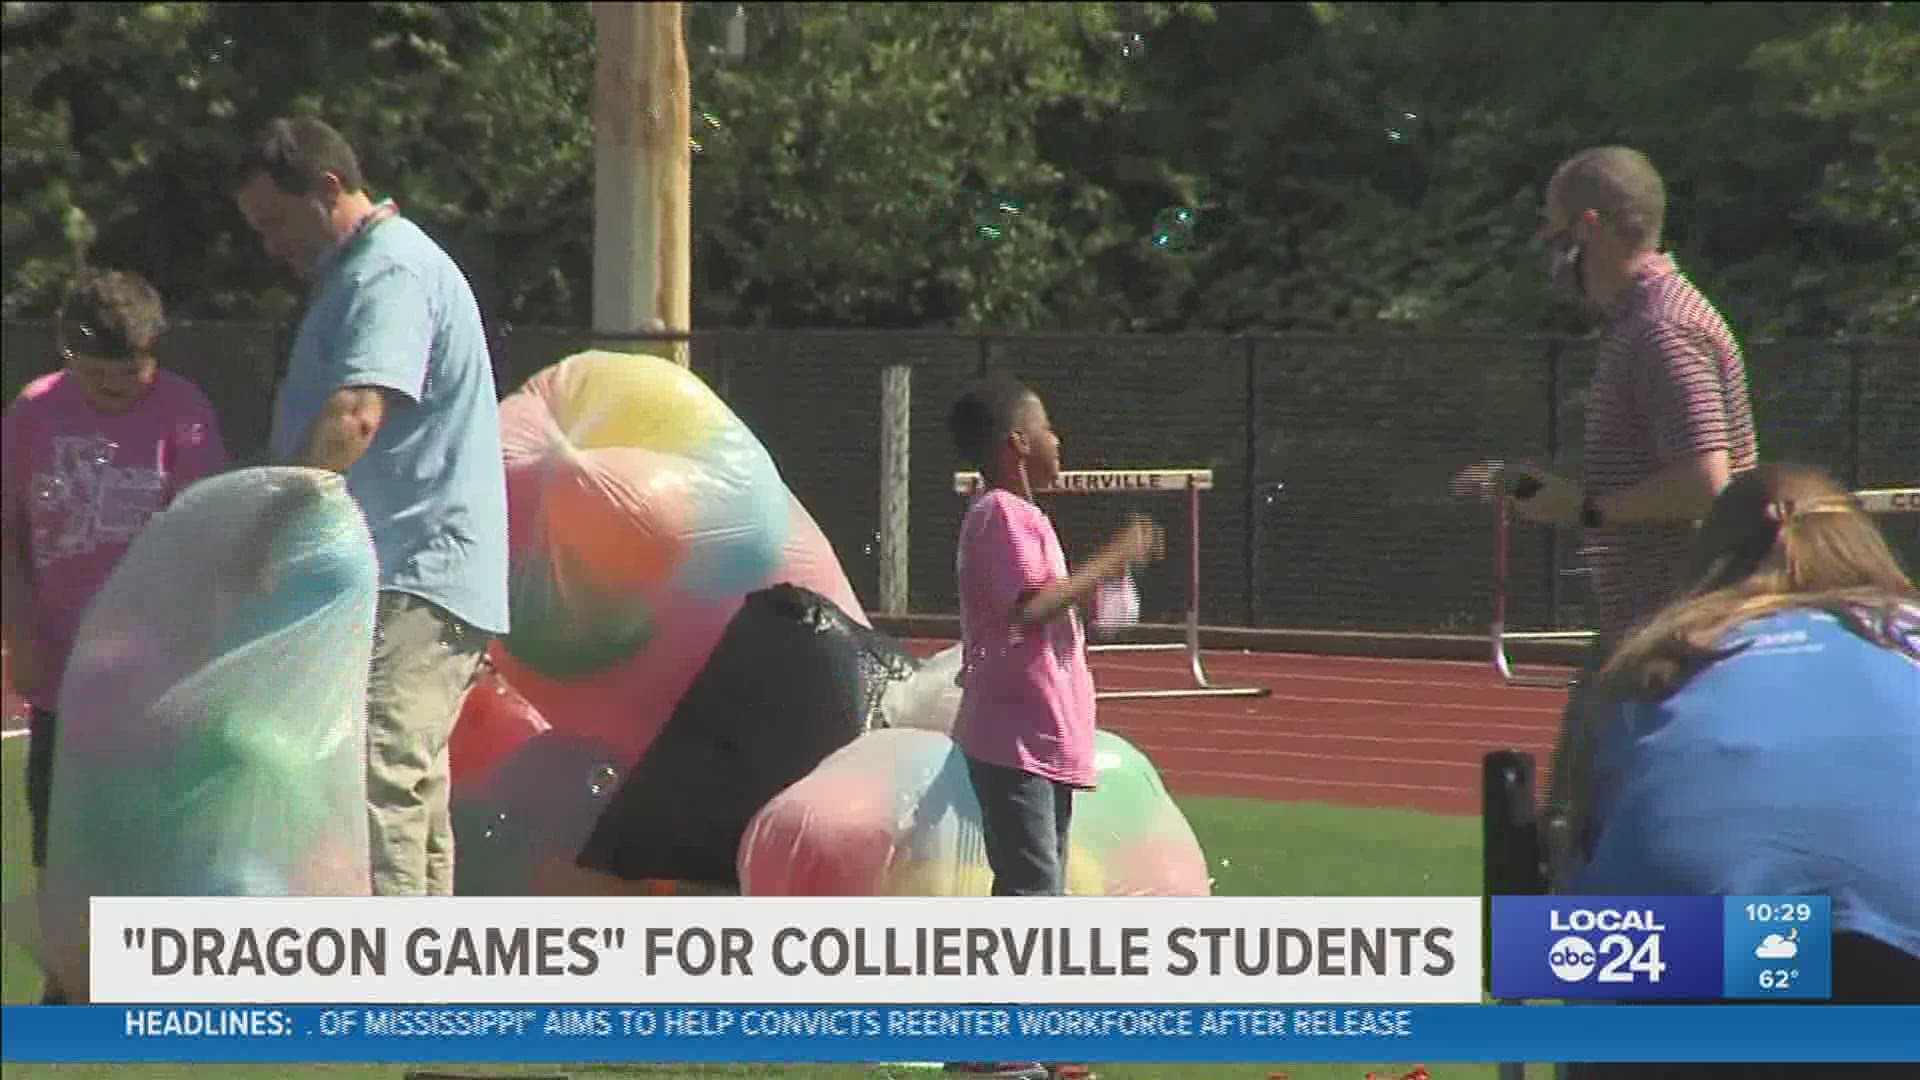 Special education students at Collierville and Crosswind Elementary Schools had a COVID-friendly field day to play and let loose.